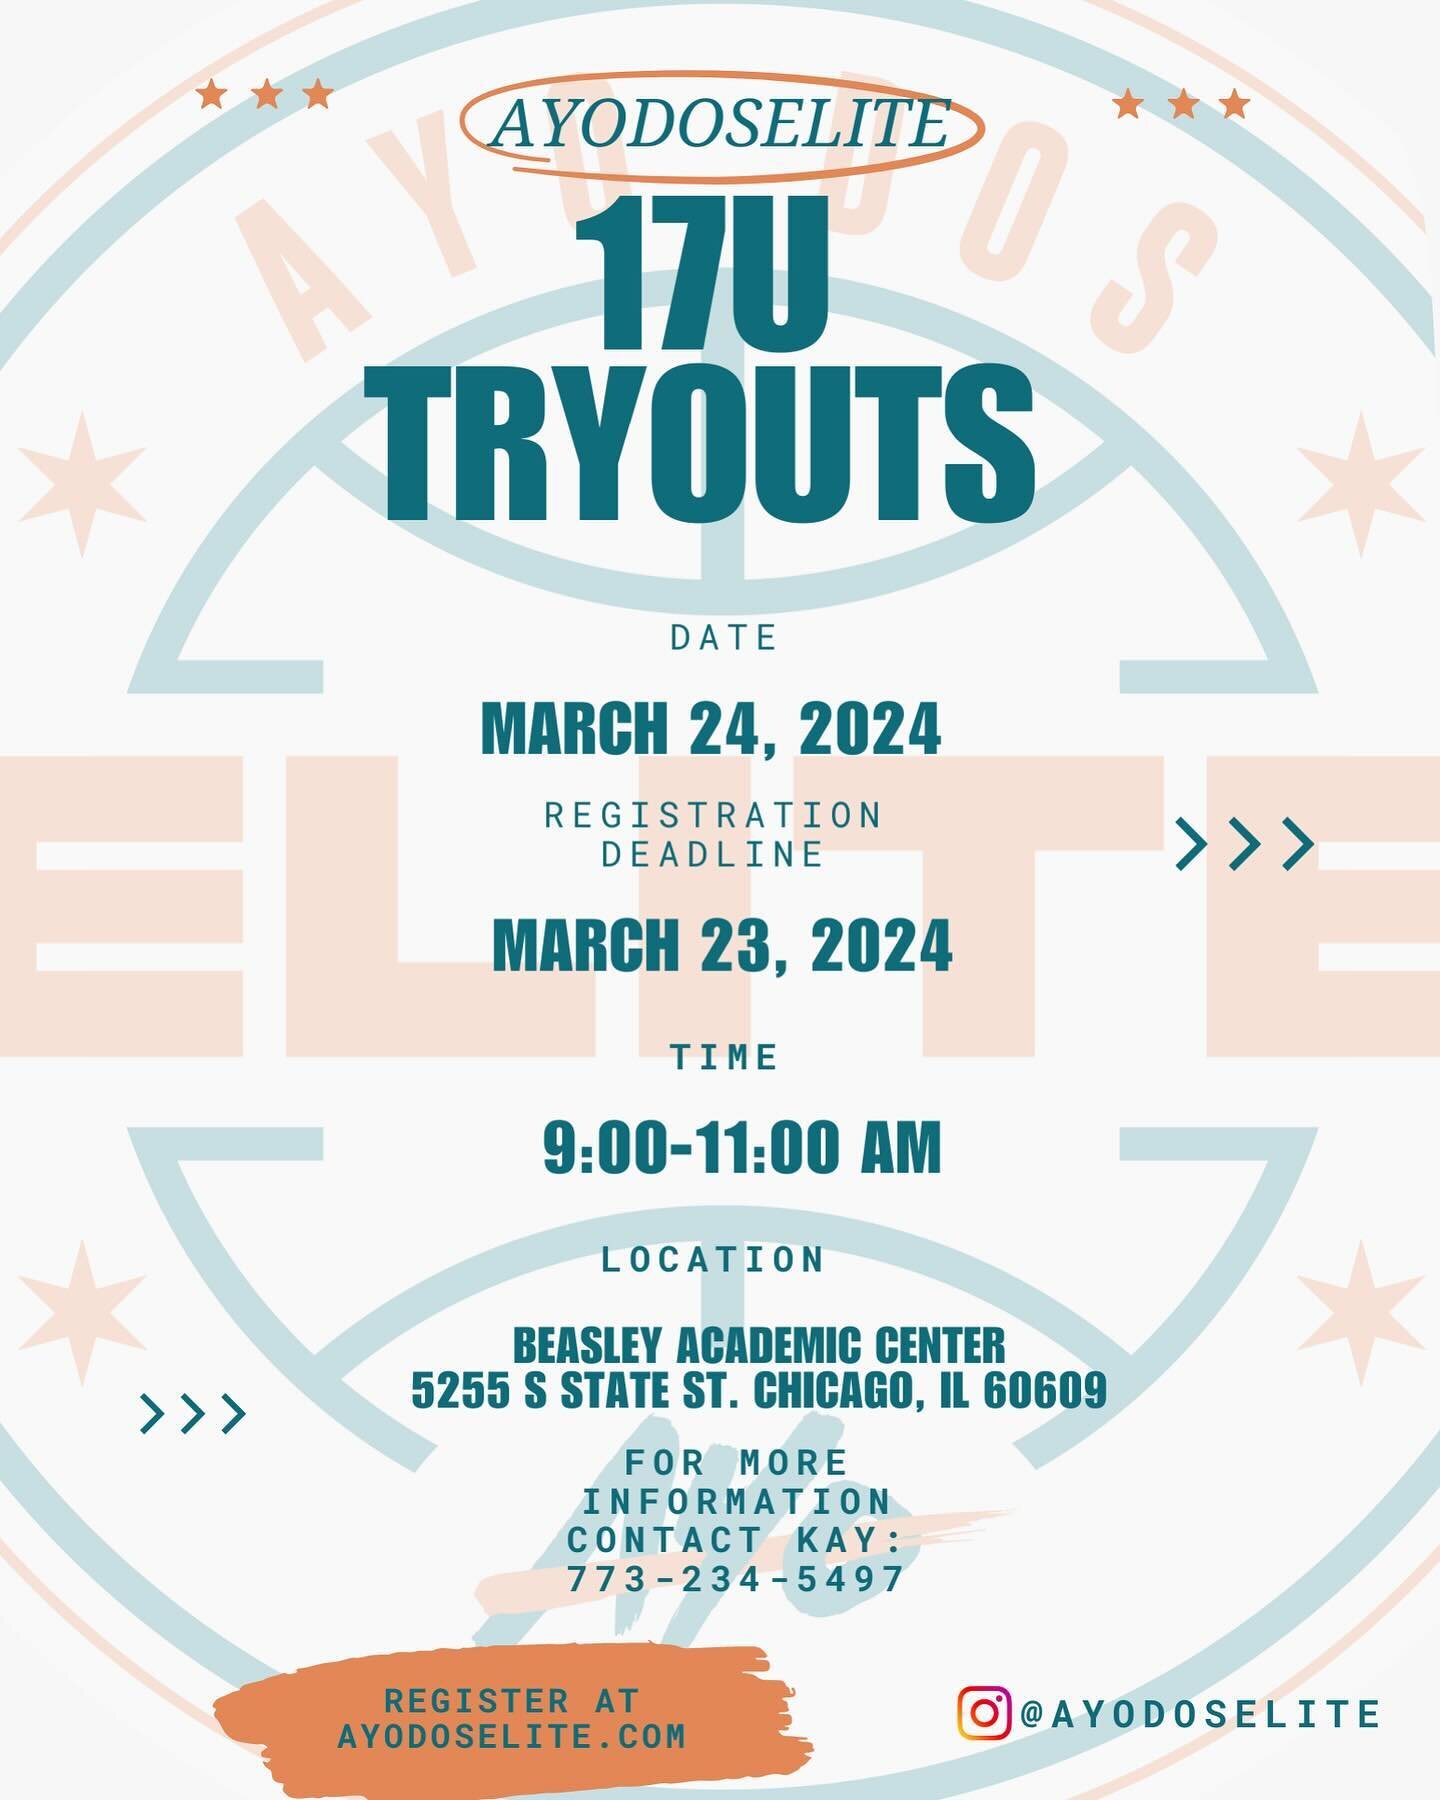 17U you&rsquo;re up next. We are ecstatic to announce we will be having our 17U tryout this weekend. Use link in bio to register.